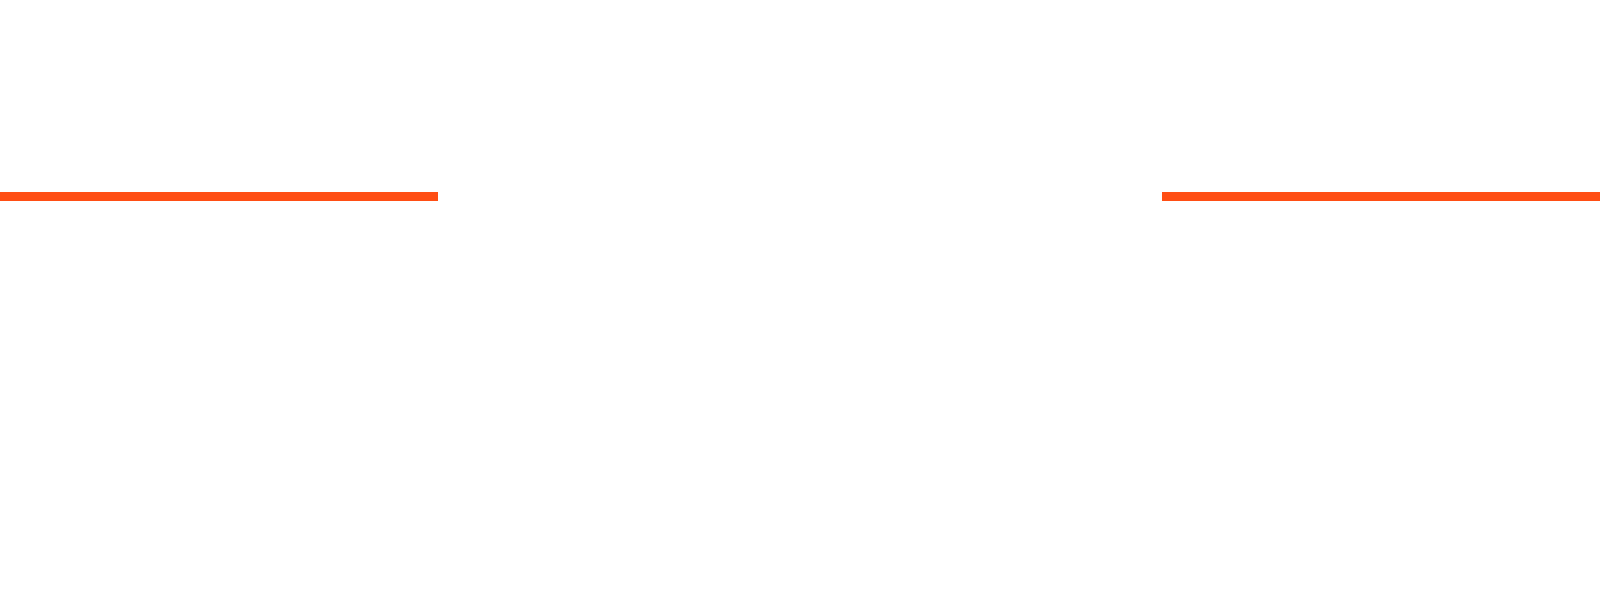 Finish Strong - Innovation That Sells